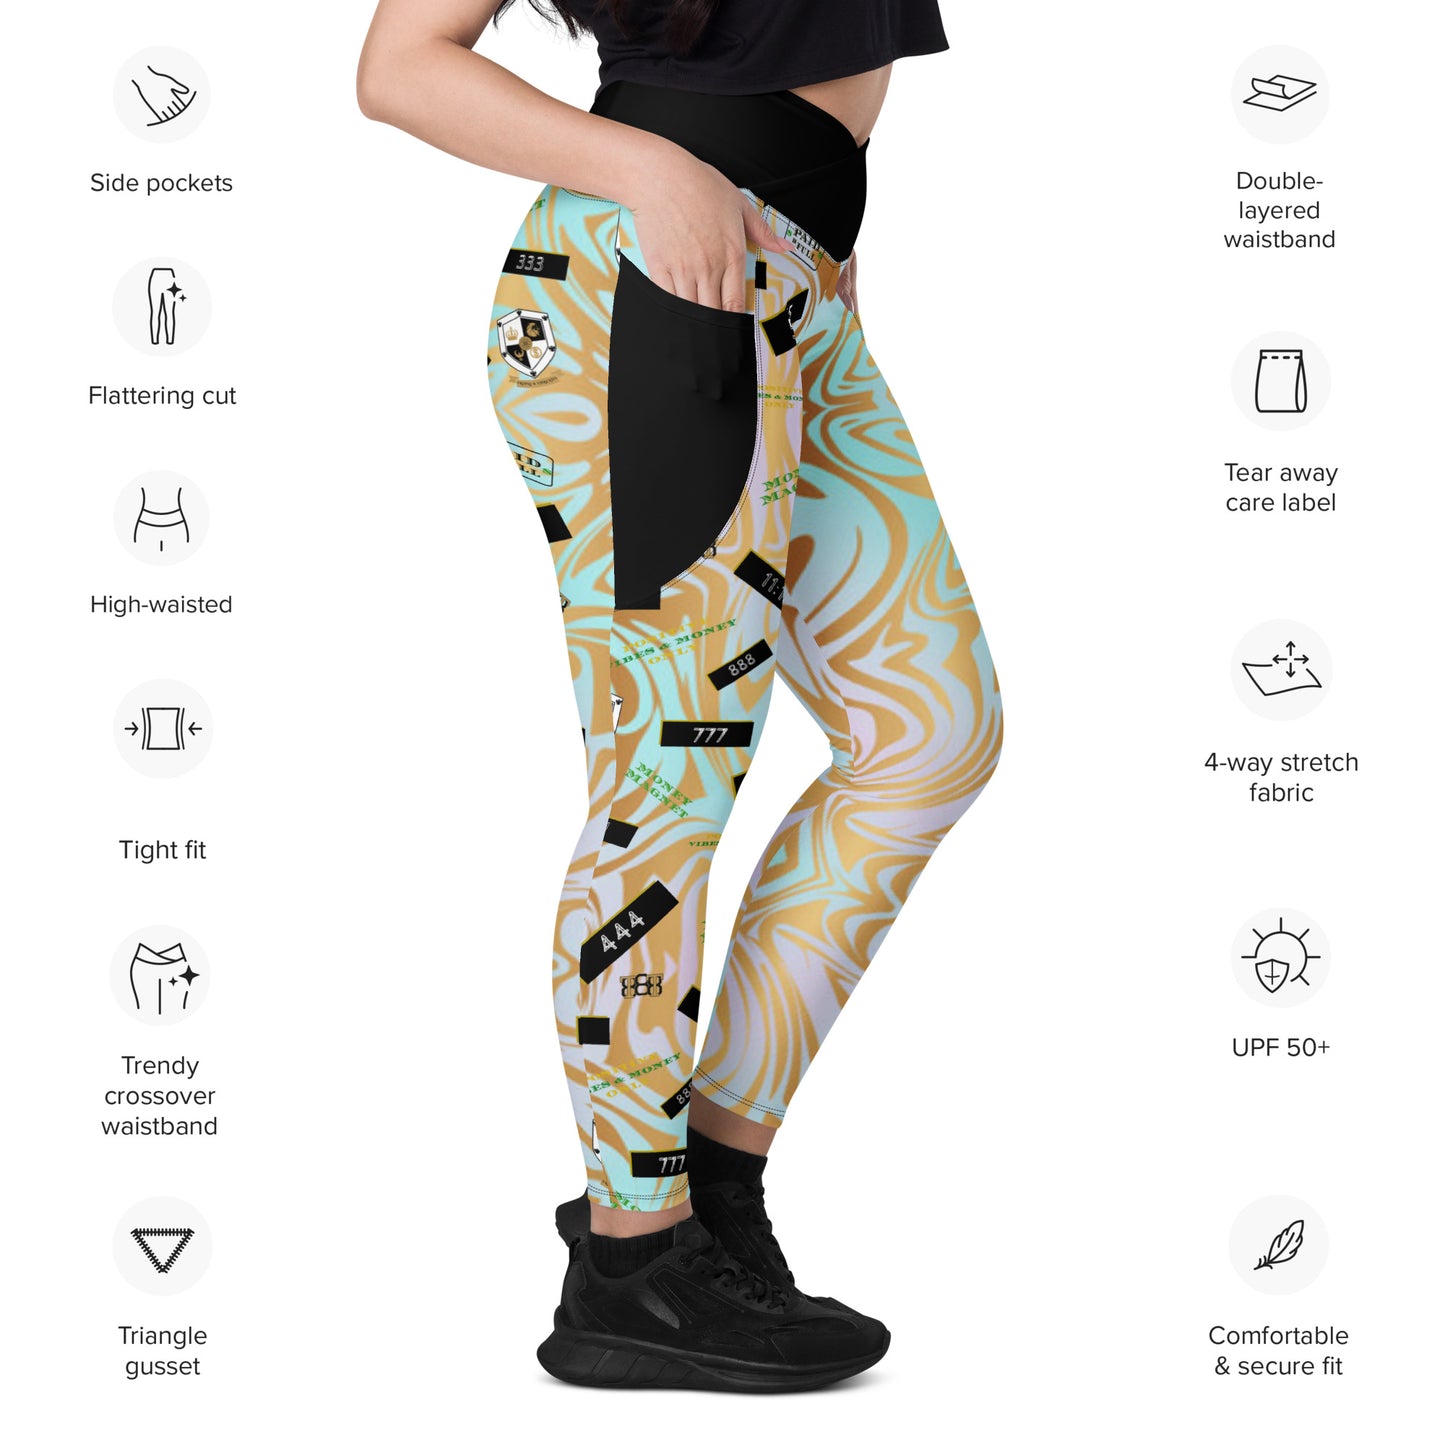 8xquiZit Collection - Women's Manifestation Pynk N Turq Jungle Luv Crossover Leggings with Pockets